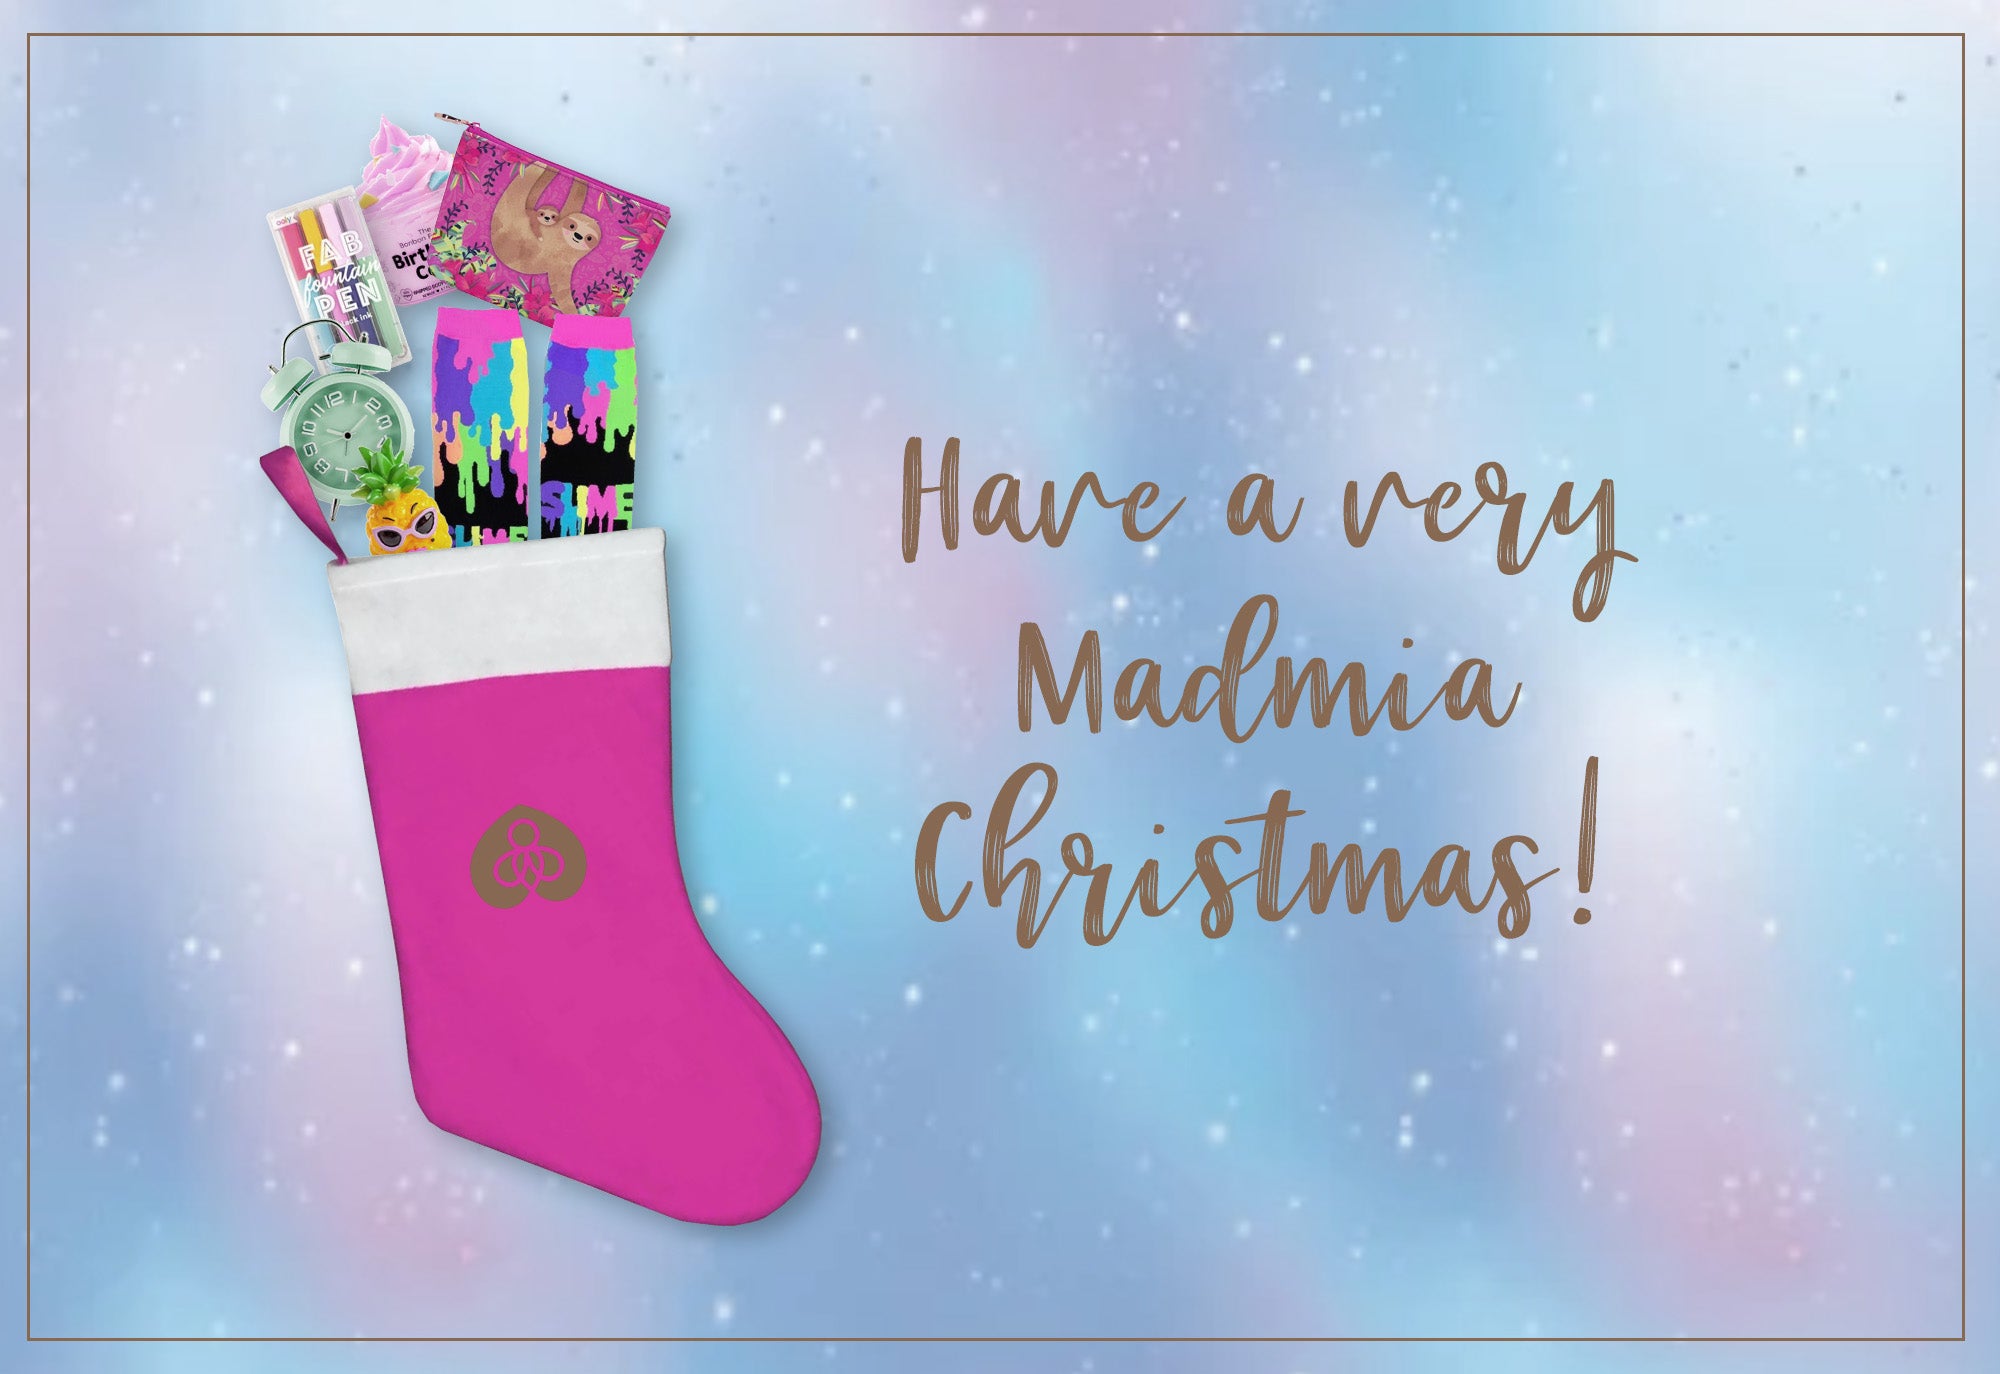 You can't go wrong with a Christmas stocking packed with goodies from Harper Bee and Madmia.